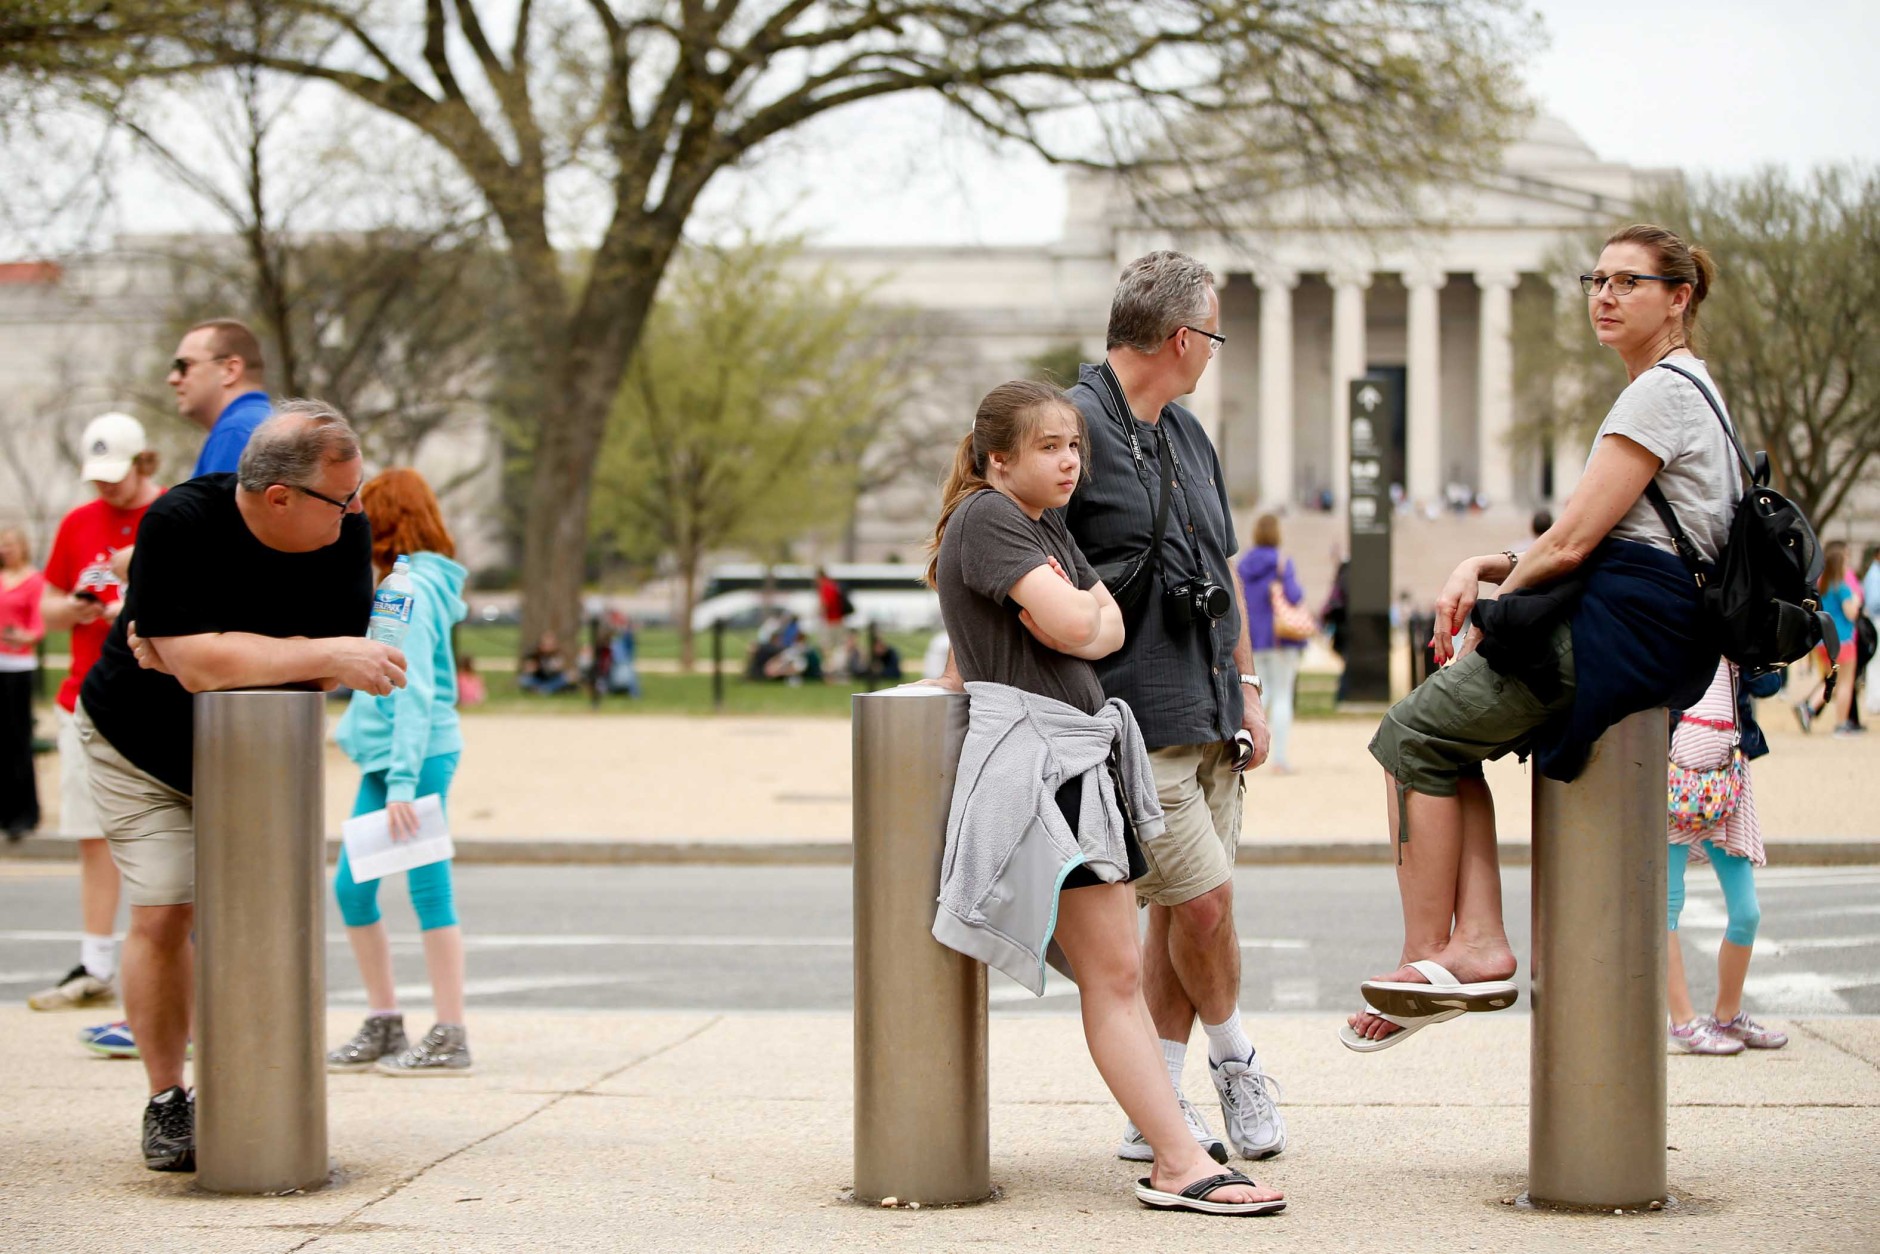 The National Gallery of Art is visible in the background as visitors to the Smithsonian's National Air and Space Museum wait for it to reopen after widespread power outages cause many of the buildings along the National Mall in Washington, to shut down temporarily, Tuesday, April 7, 2015. (AP Photo/Andrew Harnik)